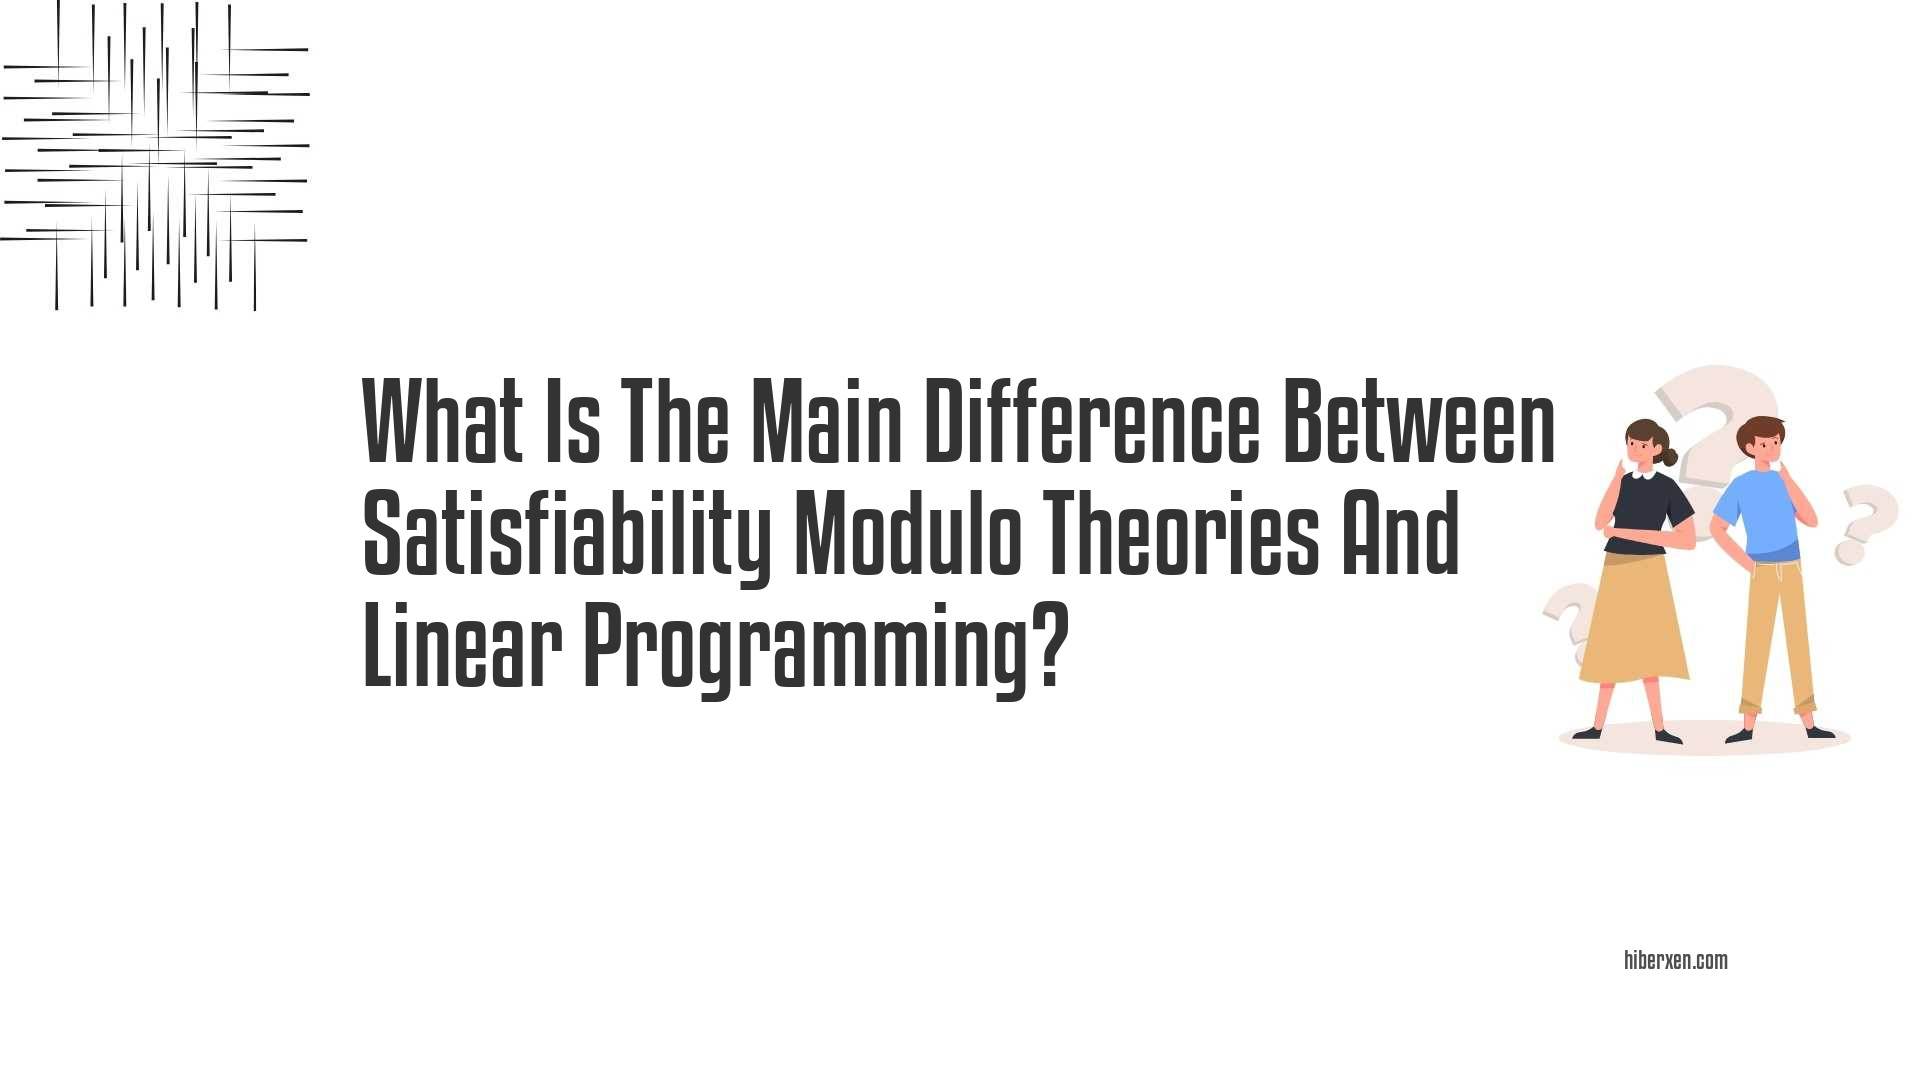 What Is The Main Difference Between Satisfiability Modulo Theories And Linear Programming?